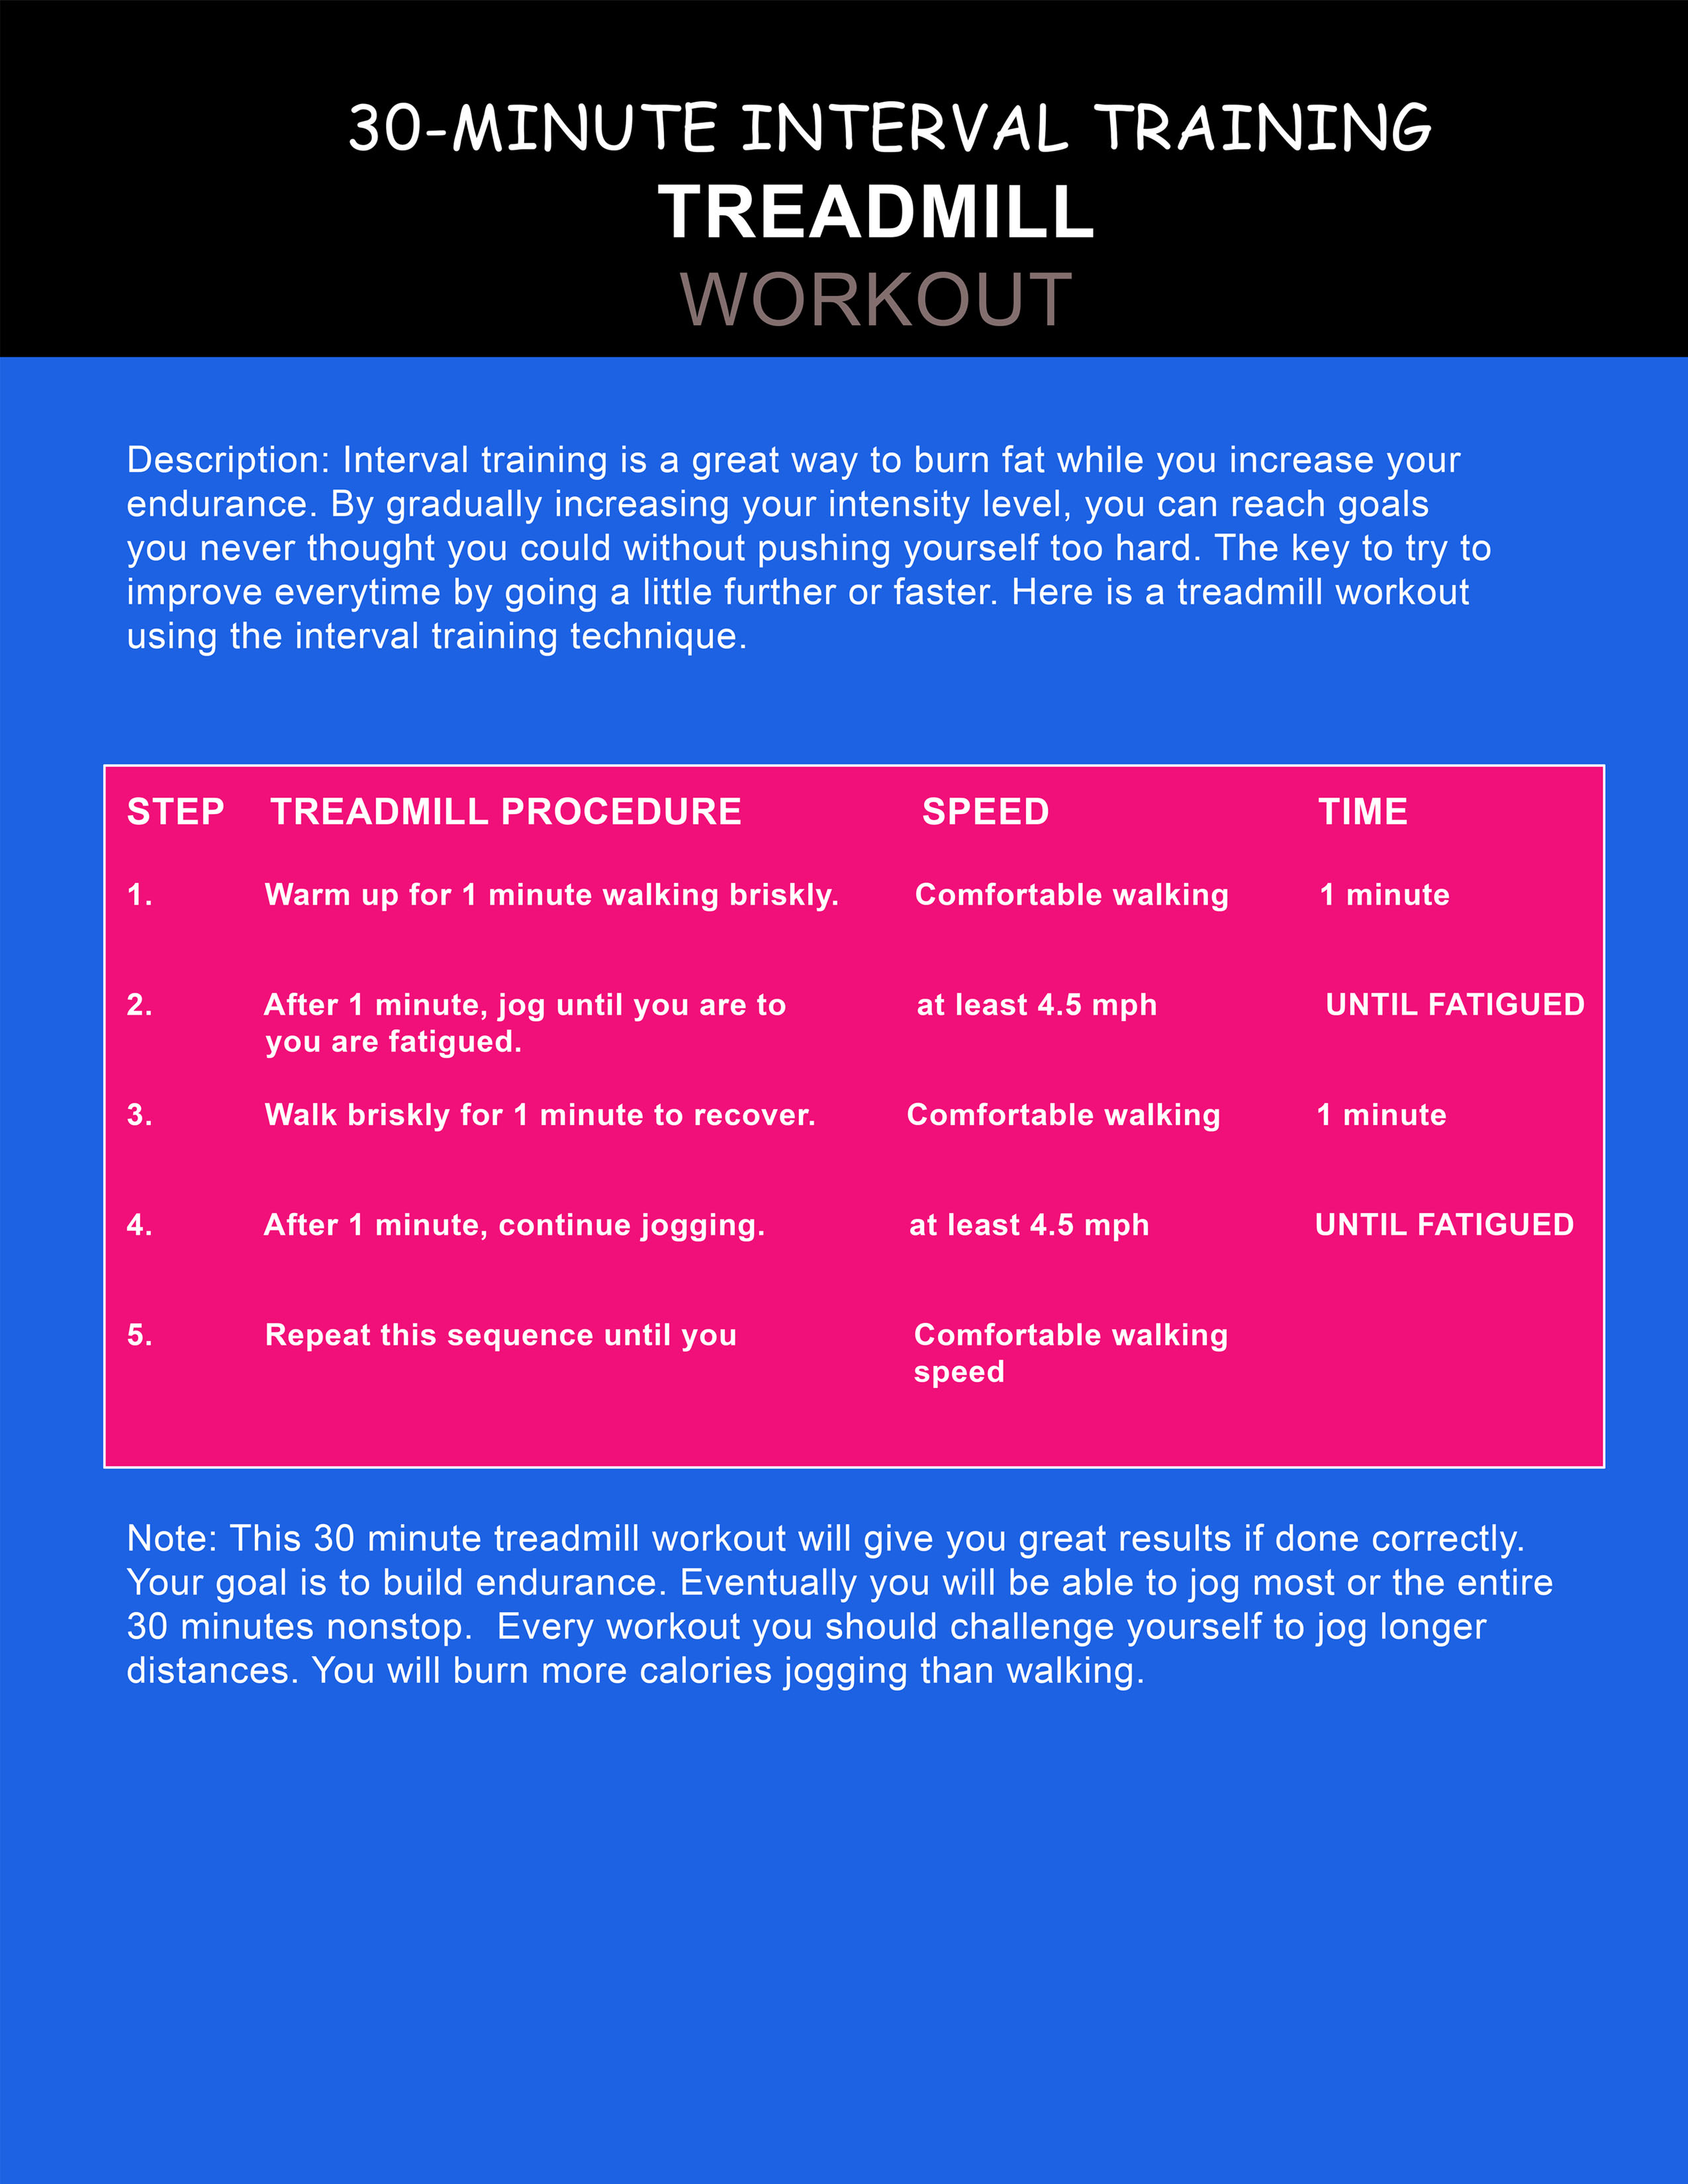 30 minute interval treadmill workout you can download and print.